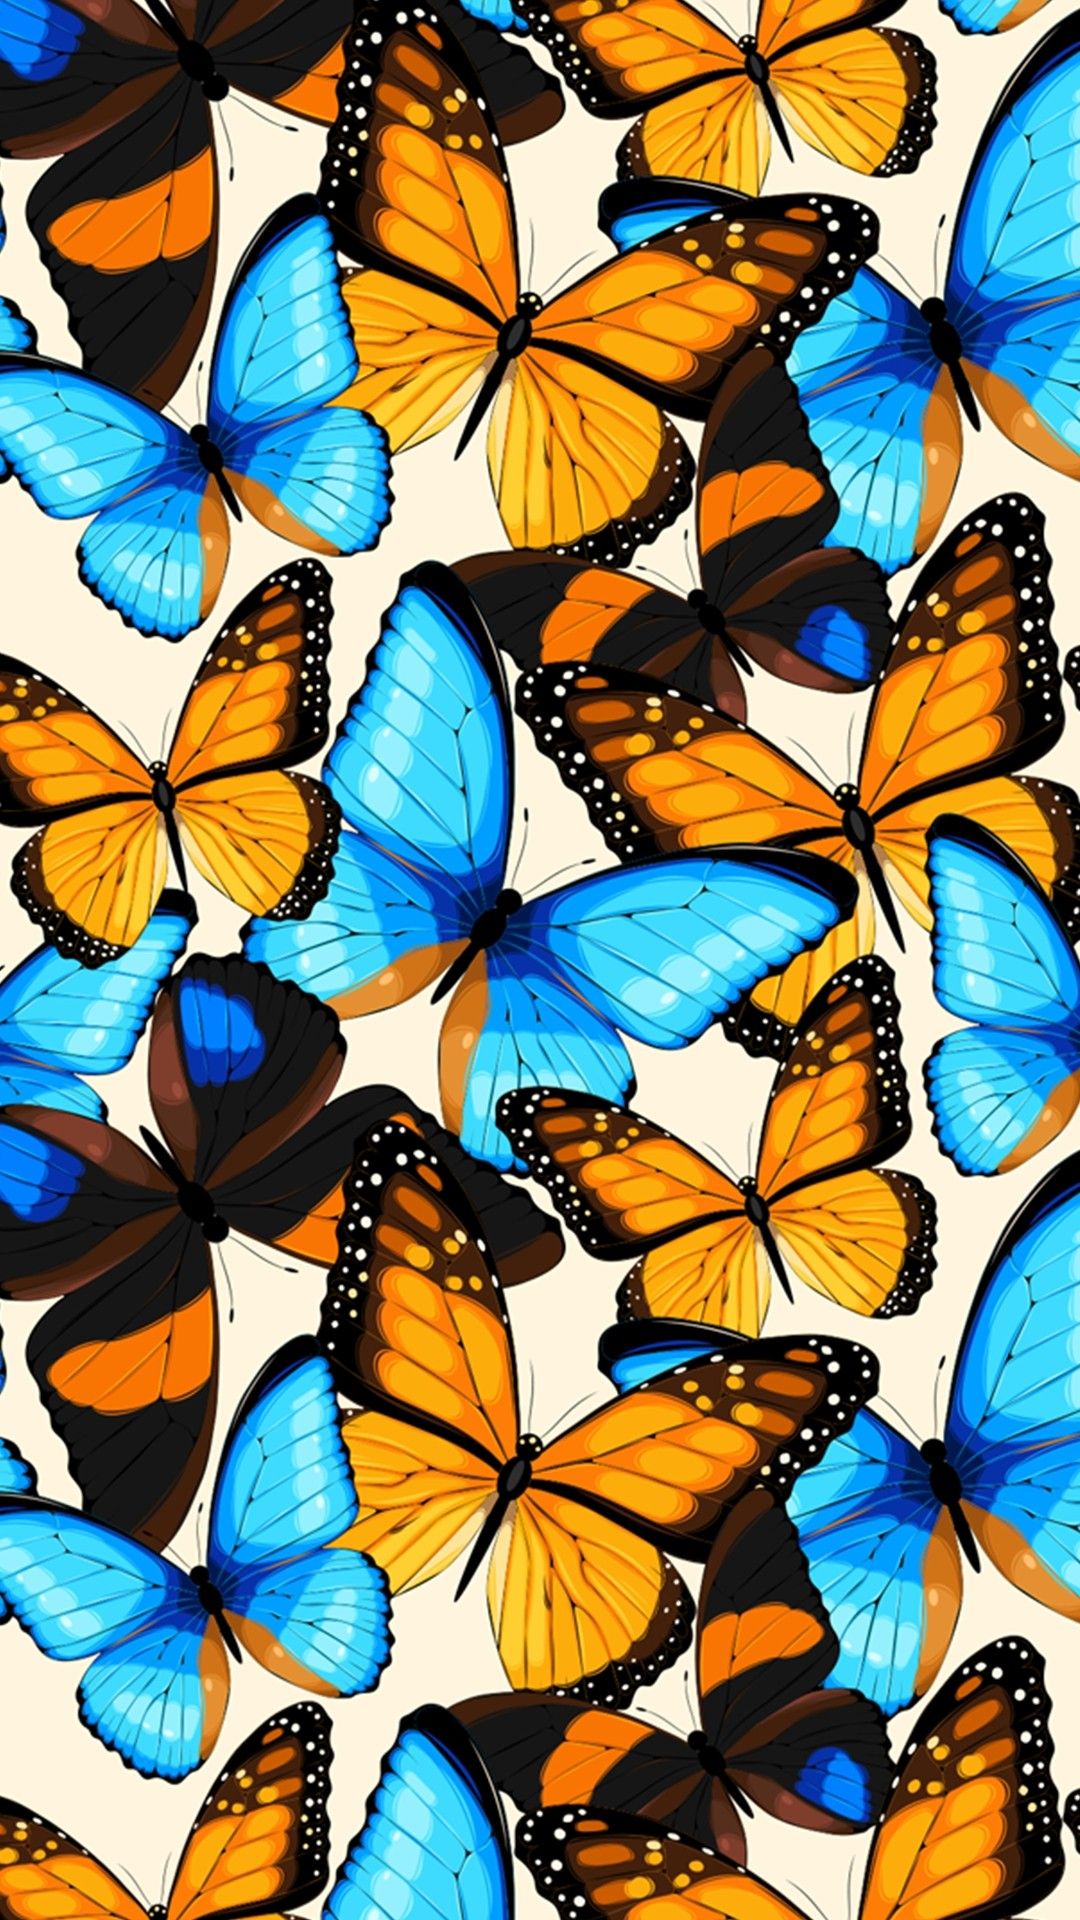 Backgrounds Iphone Vsco Wallpapers Butterfly - HD Wallpaper 